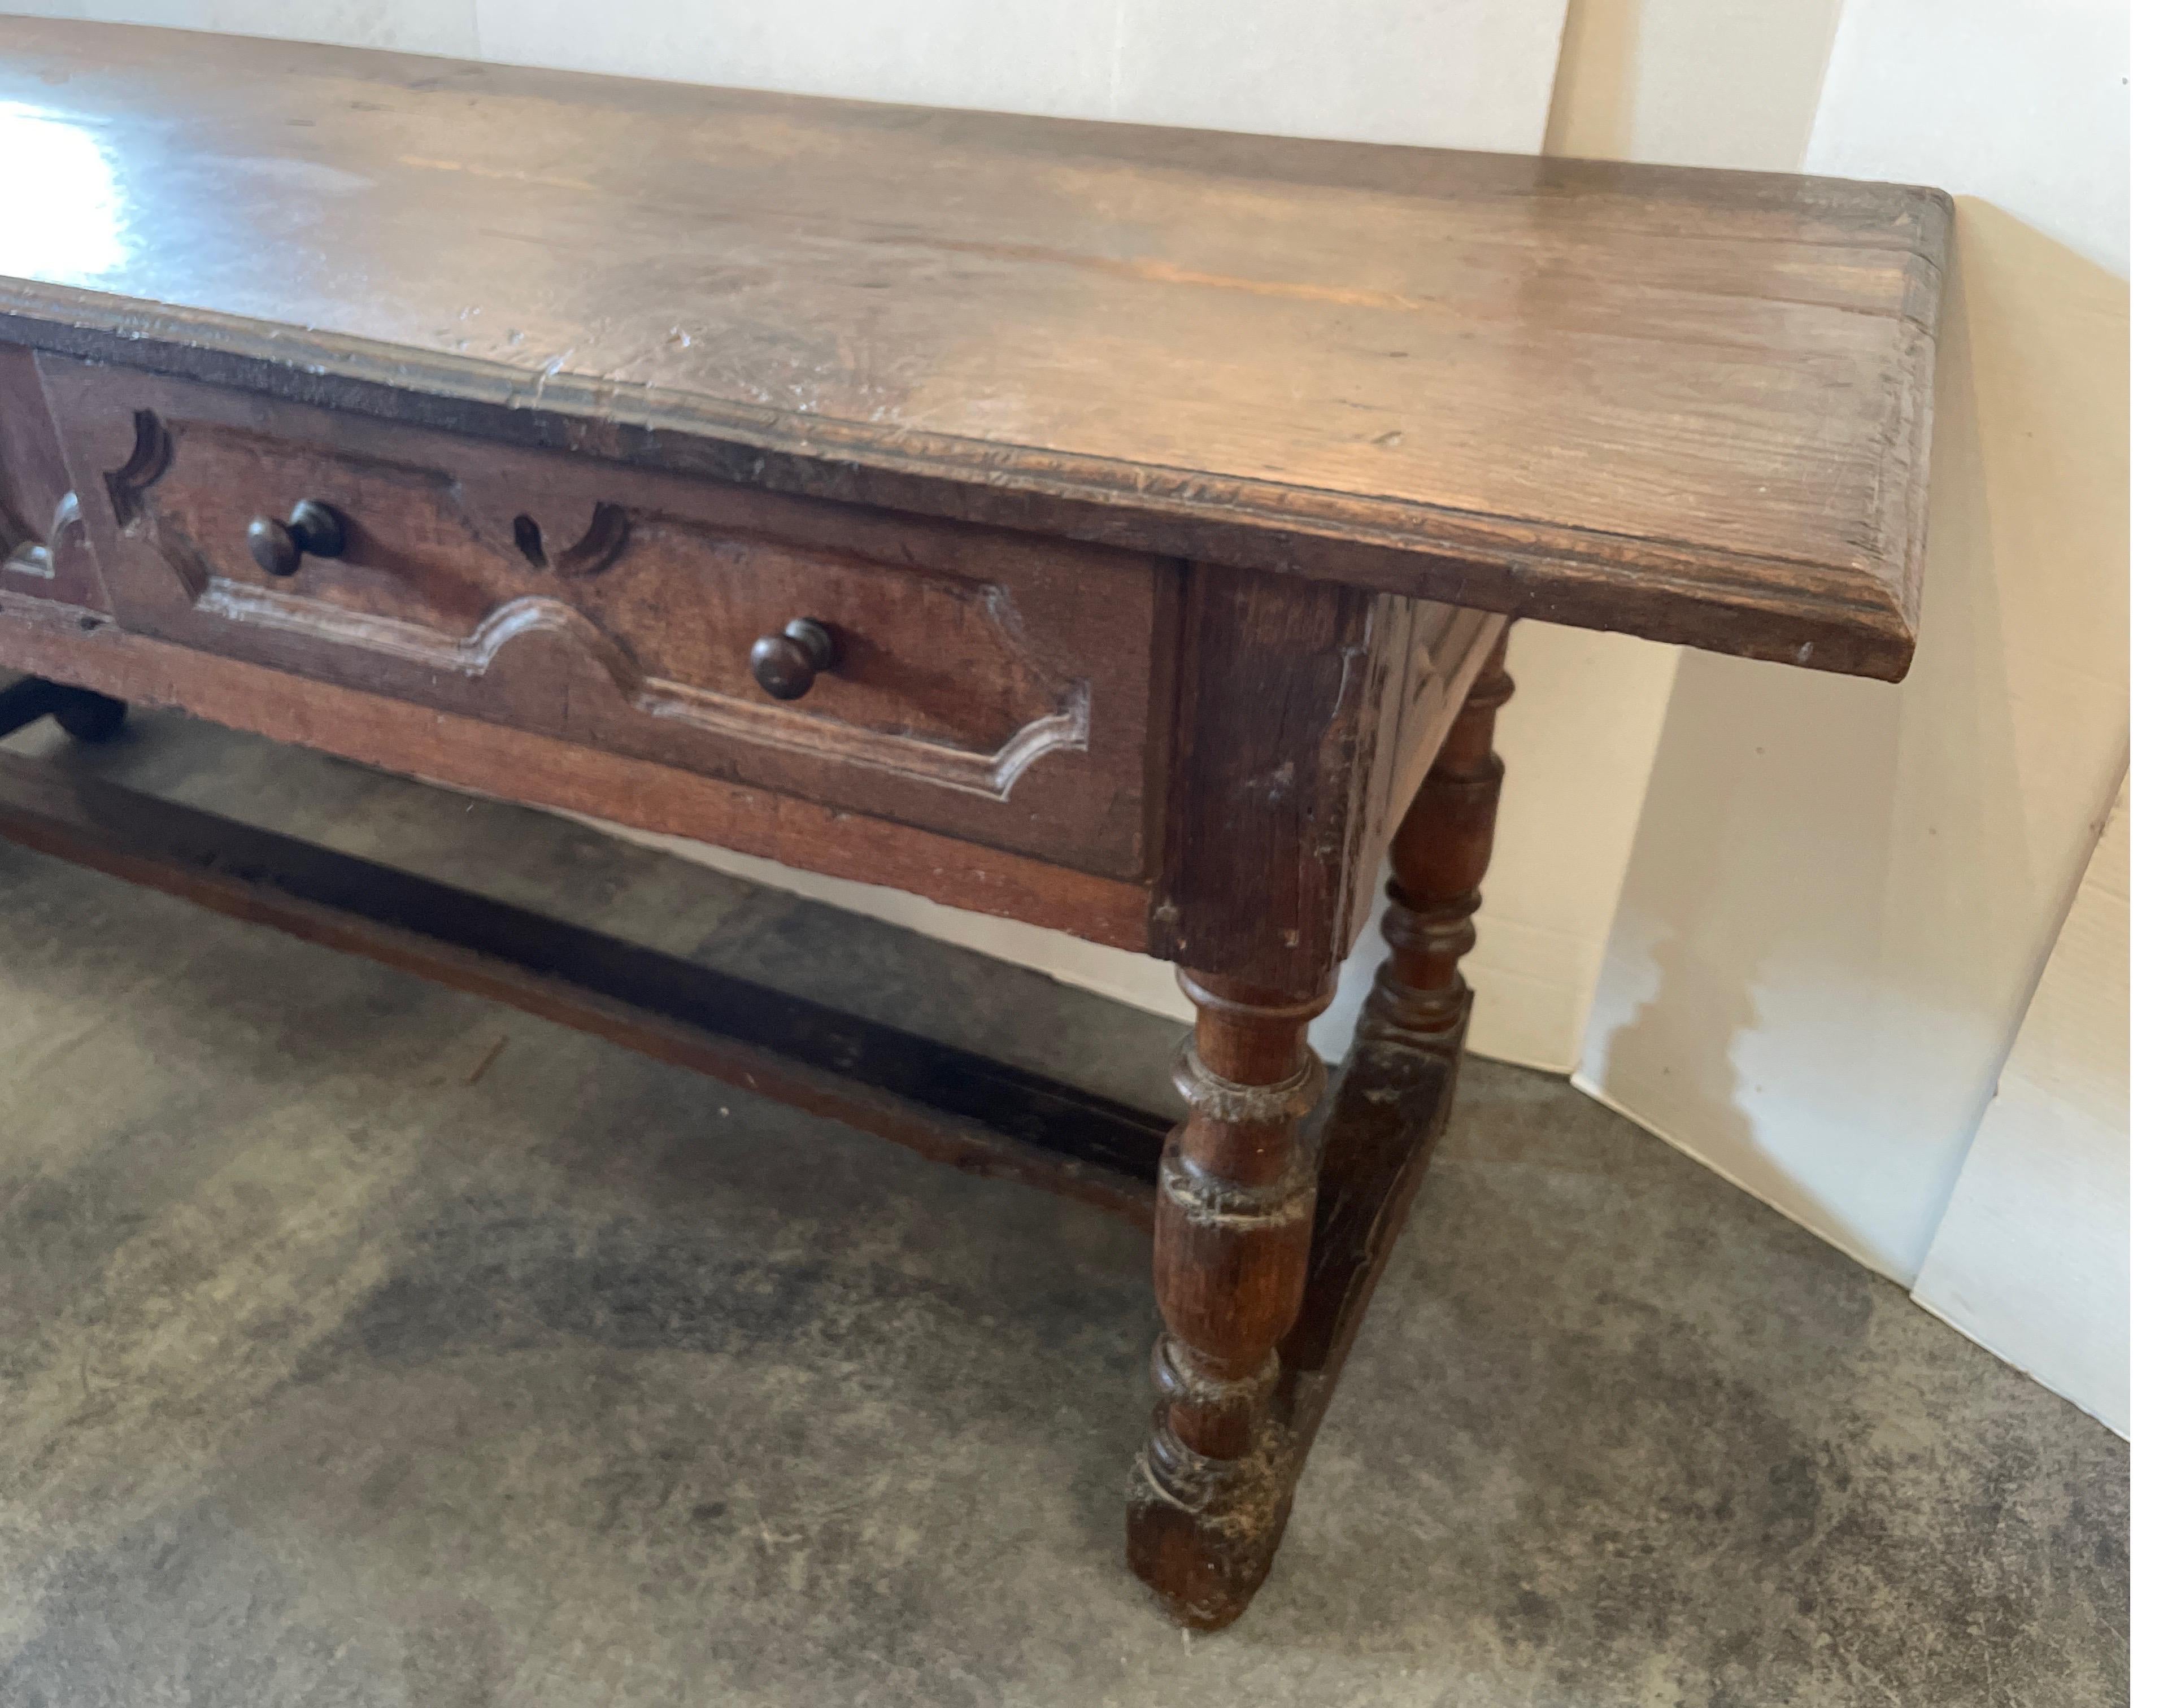 This early 1600s antique Spanish table is pure and unchanged .   It is composed of Oak wood two planks on top and pegged throughout. It's dimensions are 78.25 w x26.3/8 d x 30 t  to bottom of drawers 20 t to floor.  It could serve as a table at the